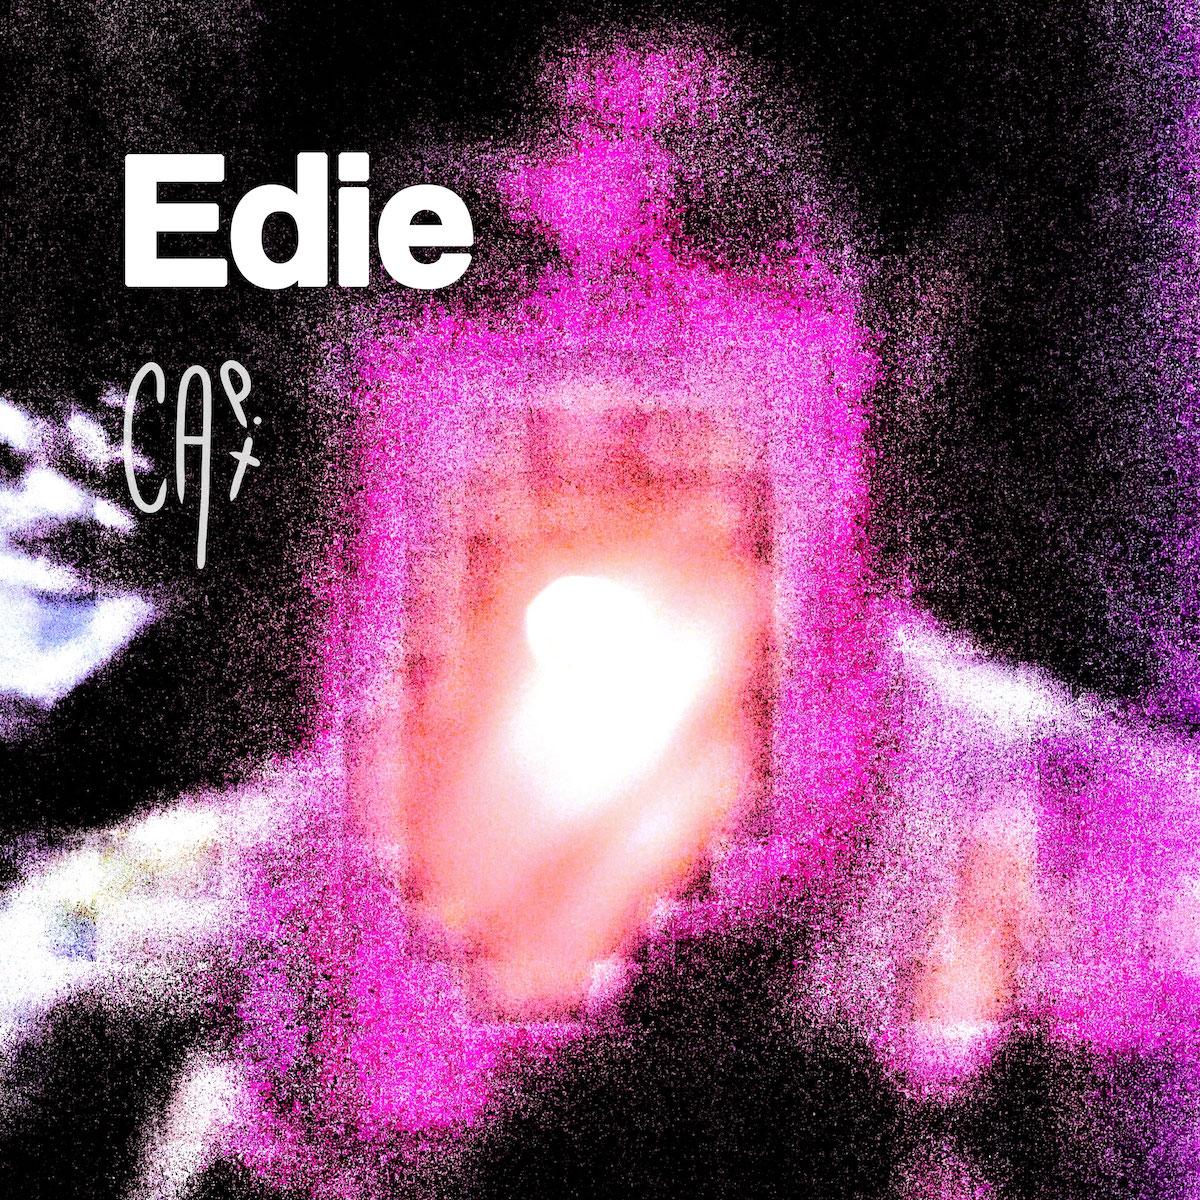 French artist Cap.Cat launches brand new EP “Edie” with techno and hip hop vibes